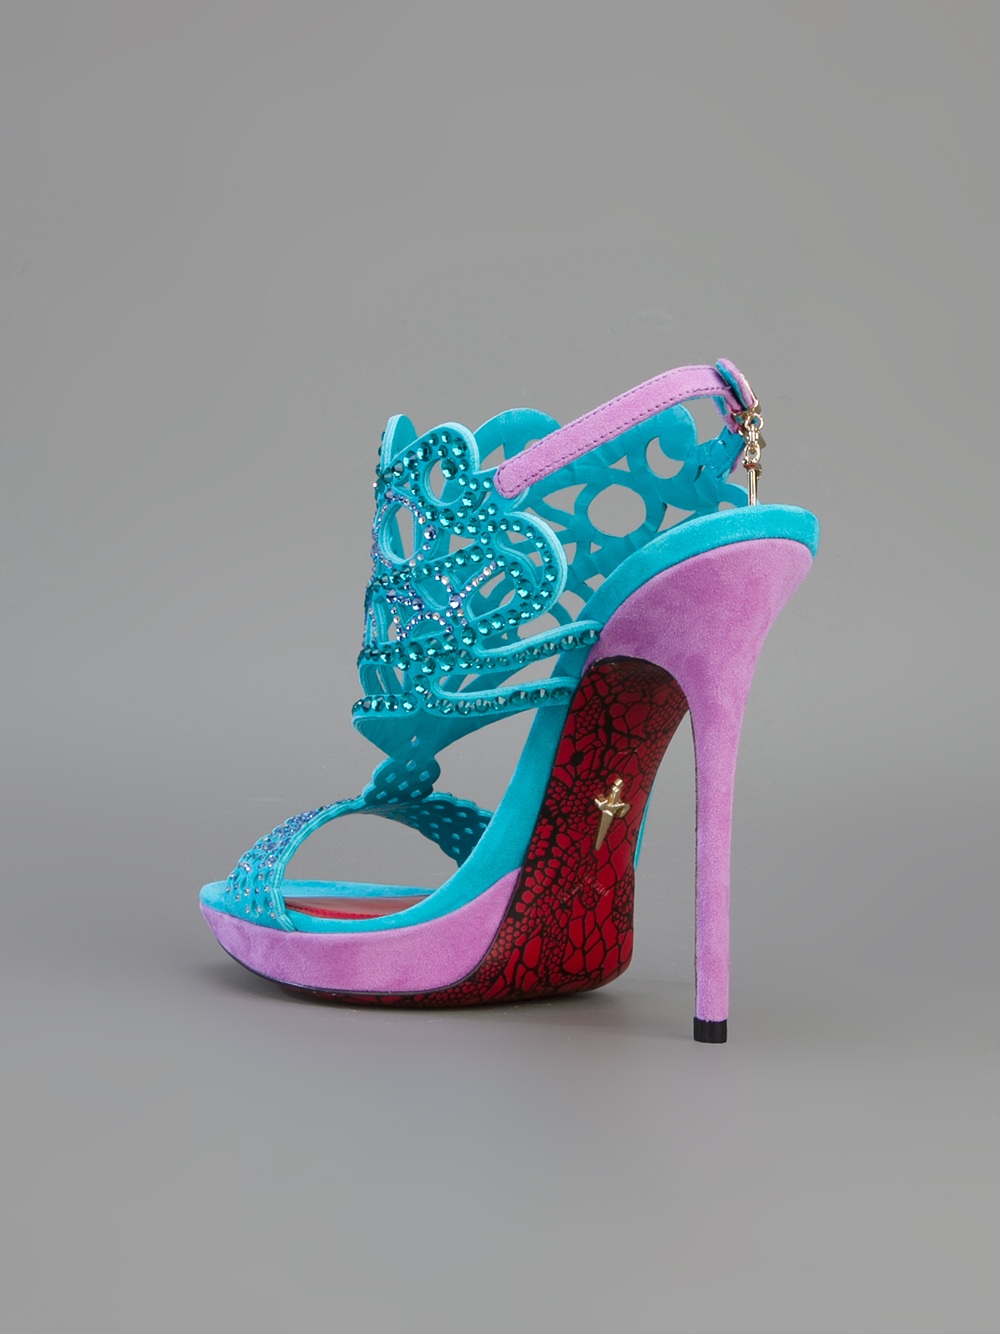 Lyst - Cesare Paciotti Crystal Studded Sandal in Blue